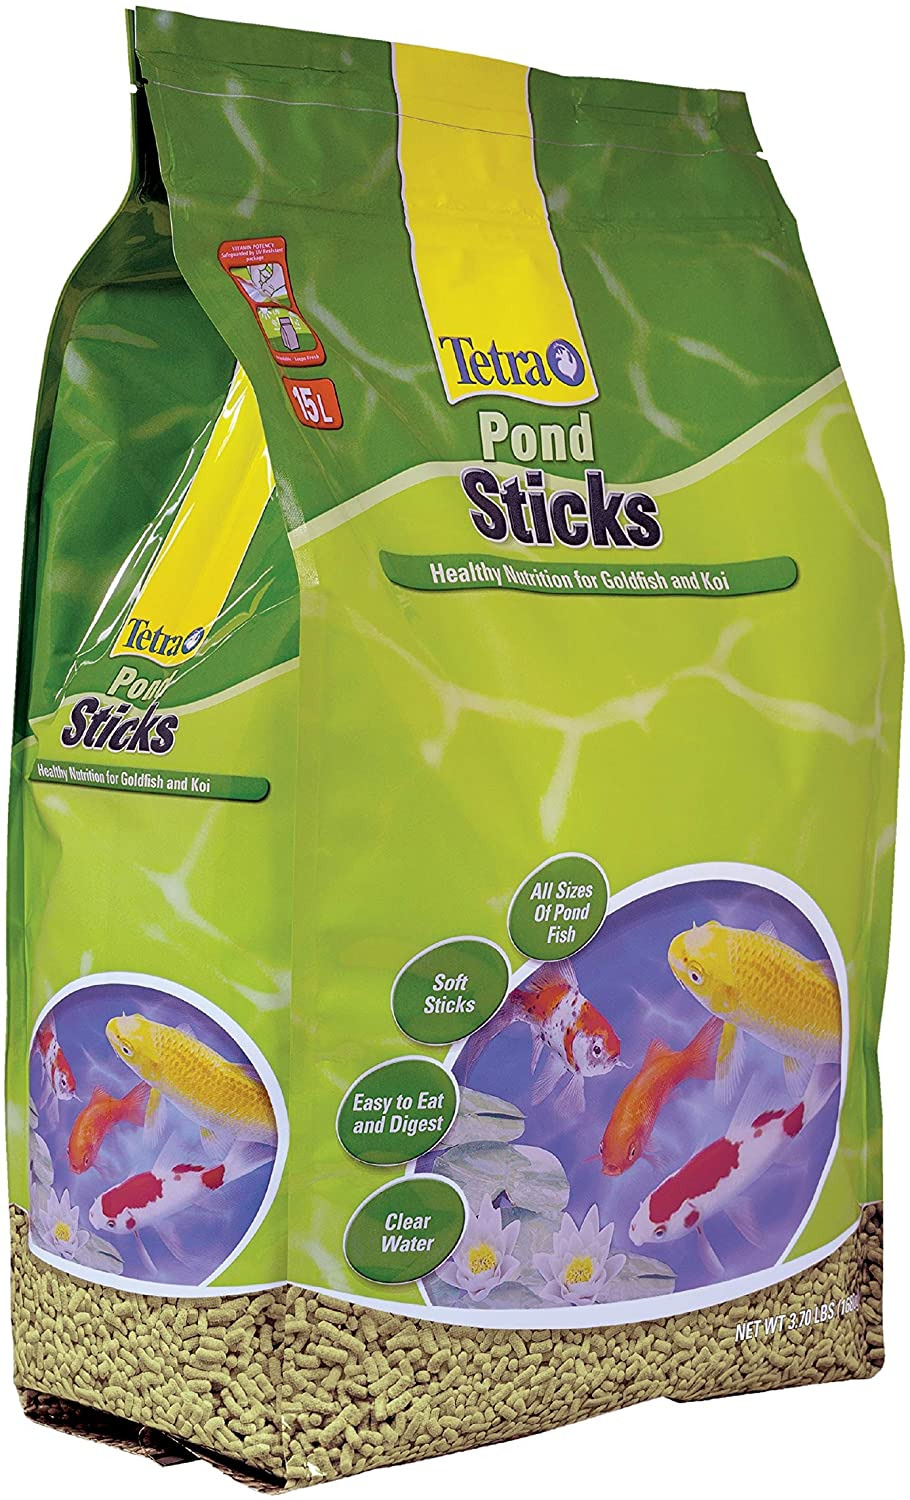 TetraPond Pond Sticks, Healthy Nutrition for Goldfish and Koi